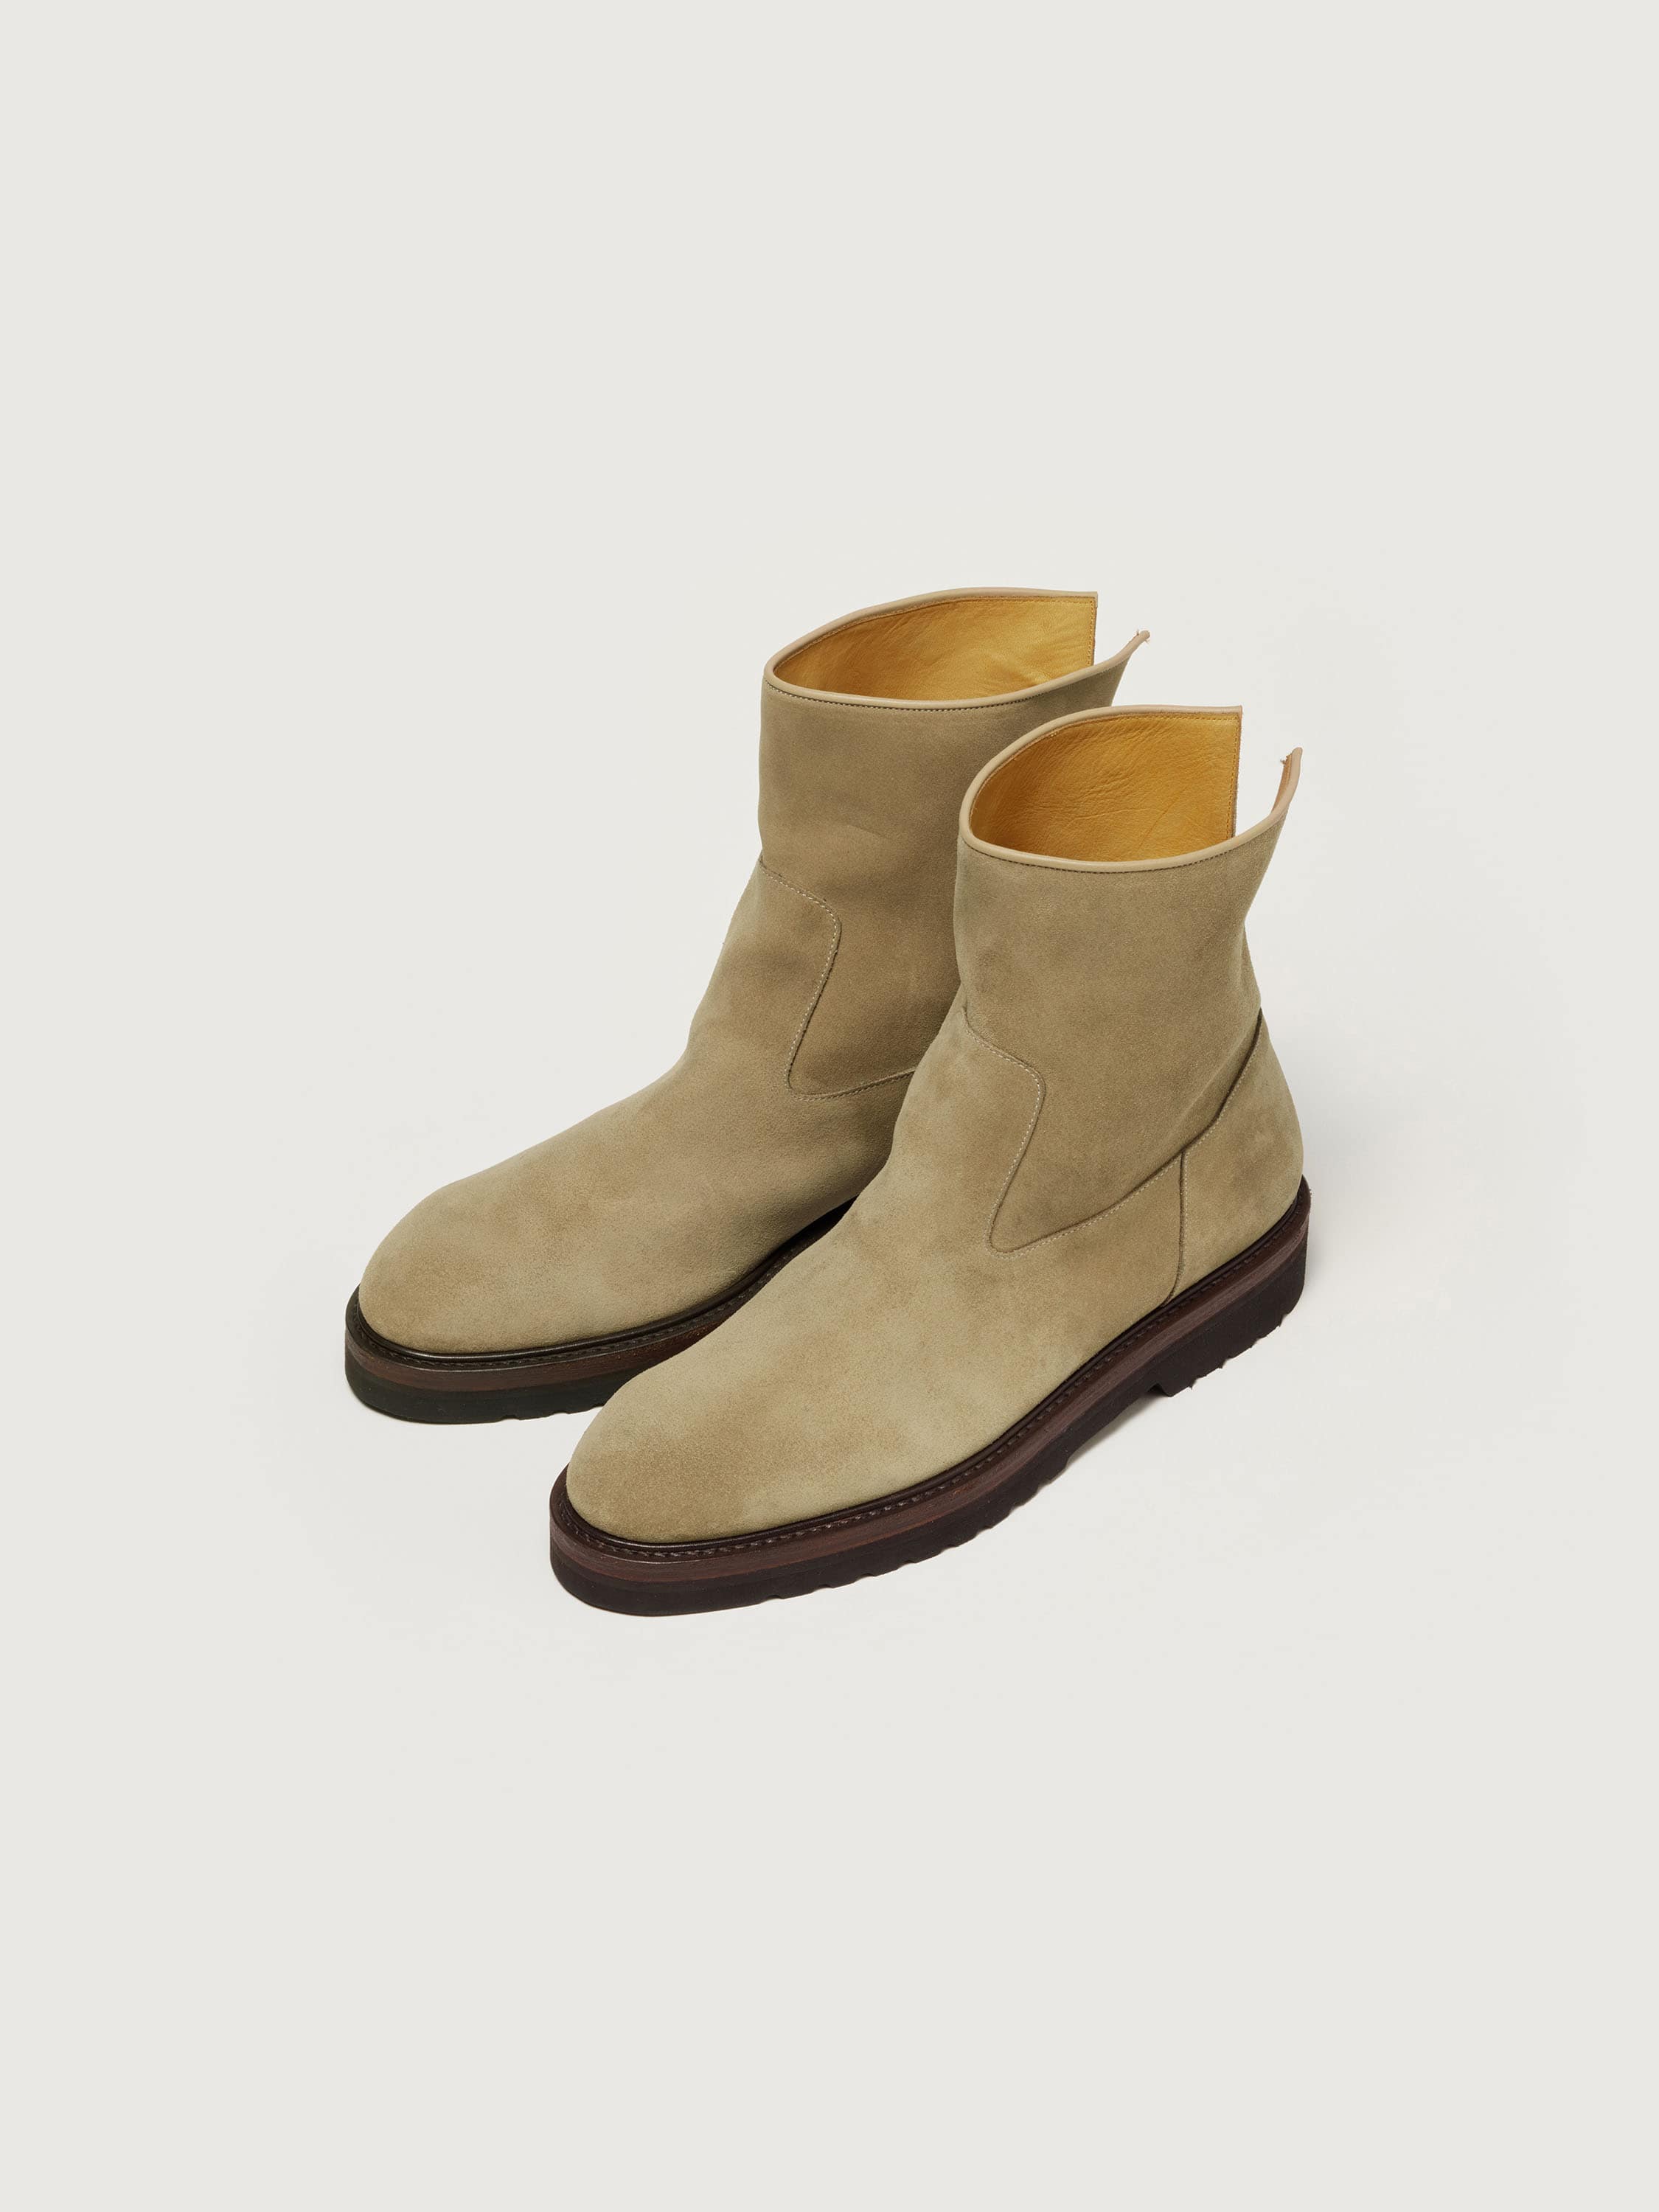 LEATHER BOOTS 詳細画像 BEIGE SUEDE 1